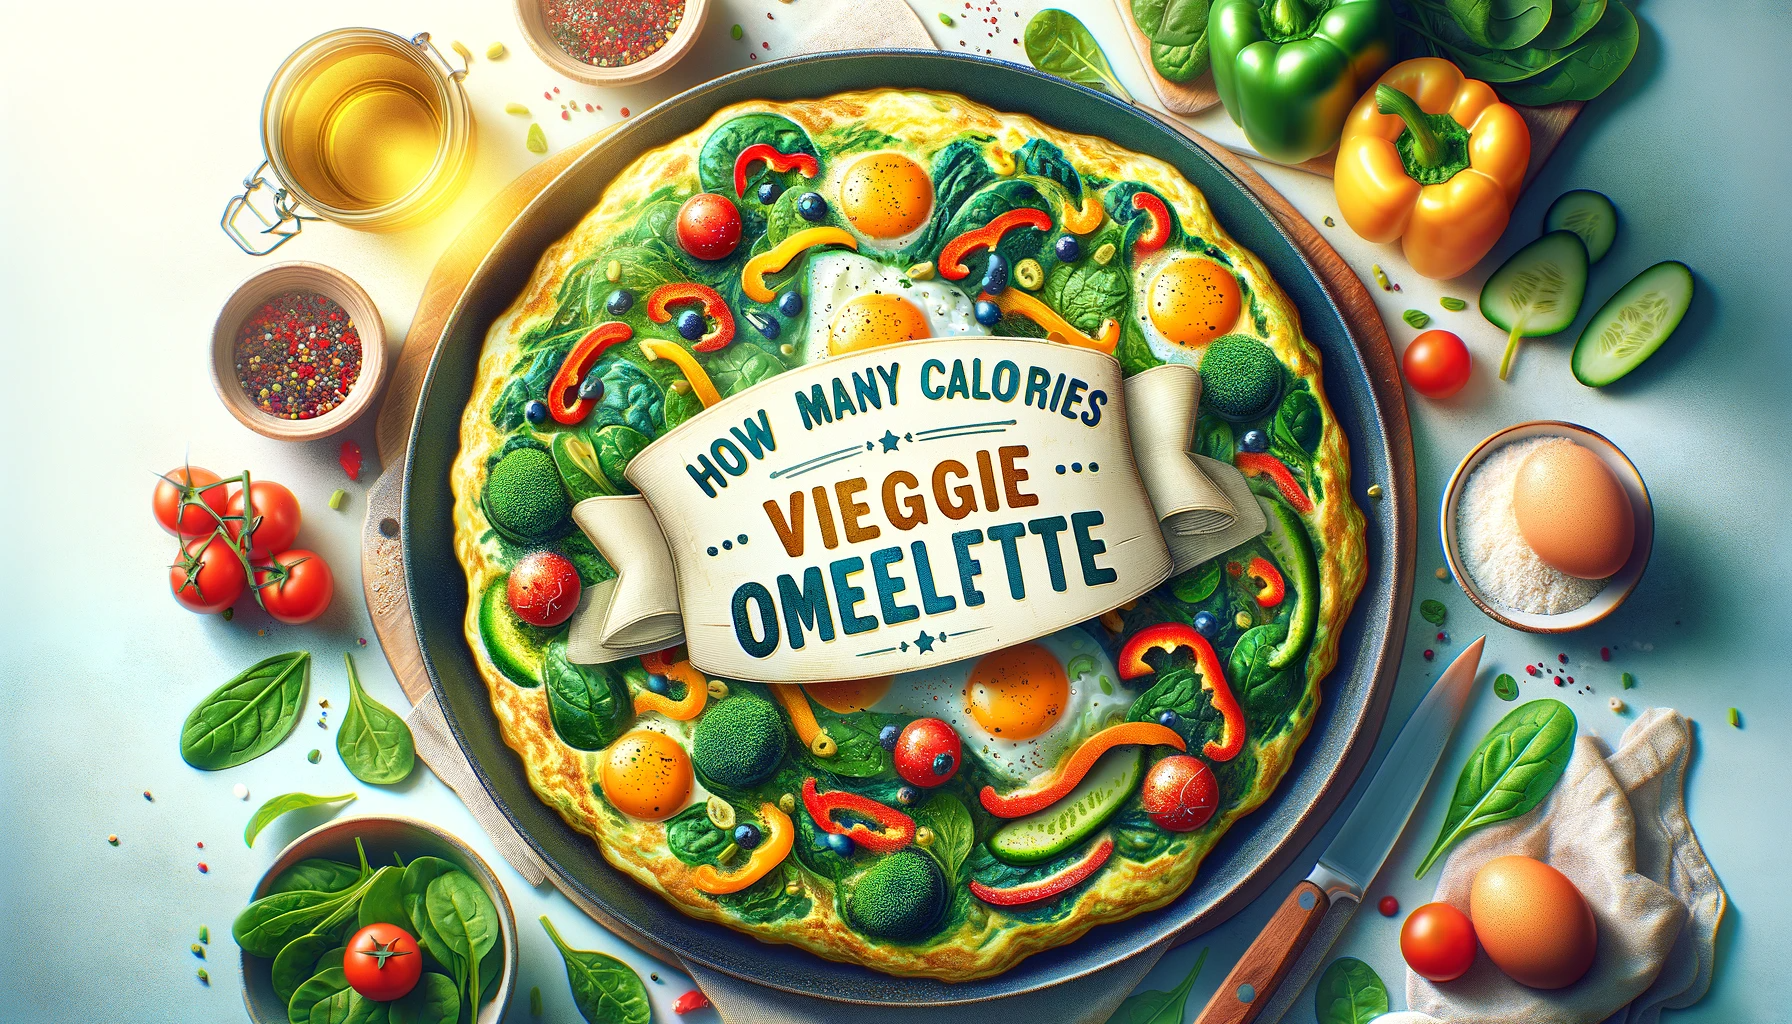 How Many Calories in Veggie Omelette